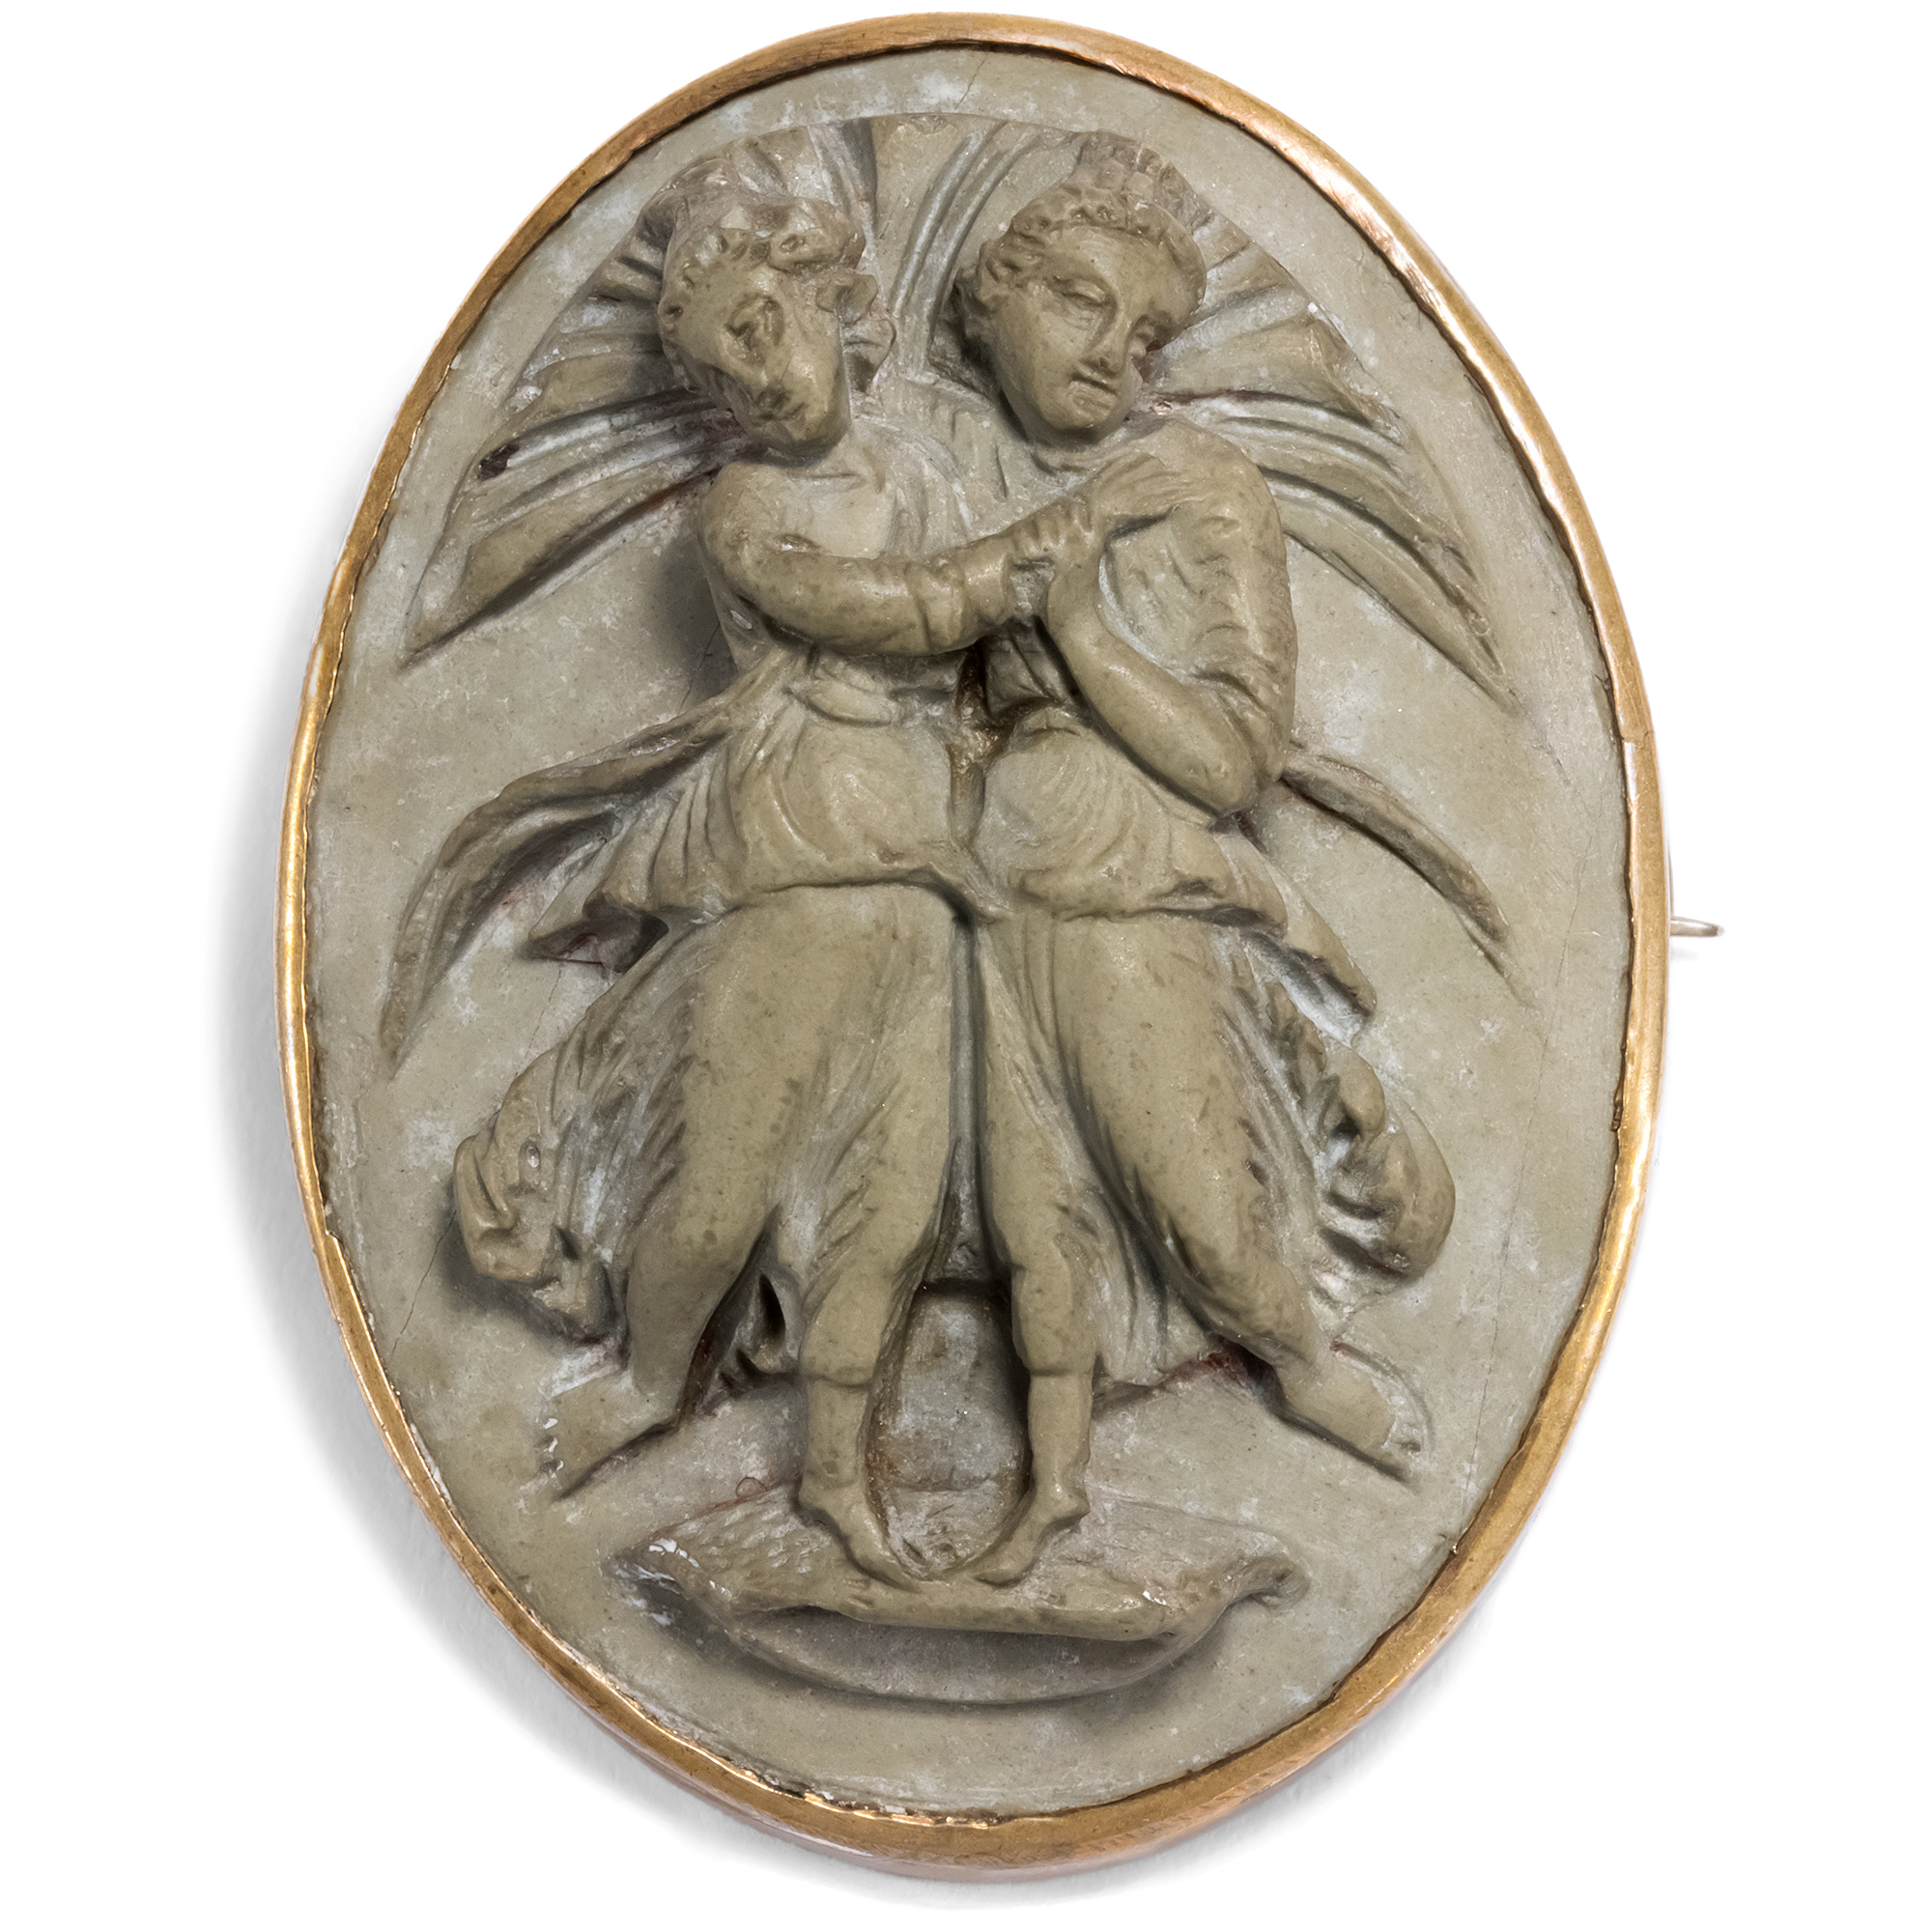 Graceful "Lava" Comeo With Dancing Muses As Brooch, Italy Circa 1870